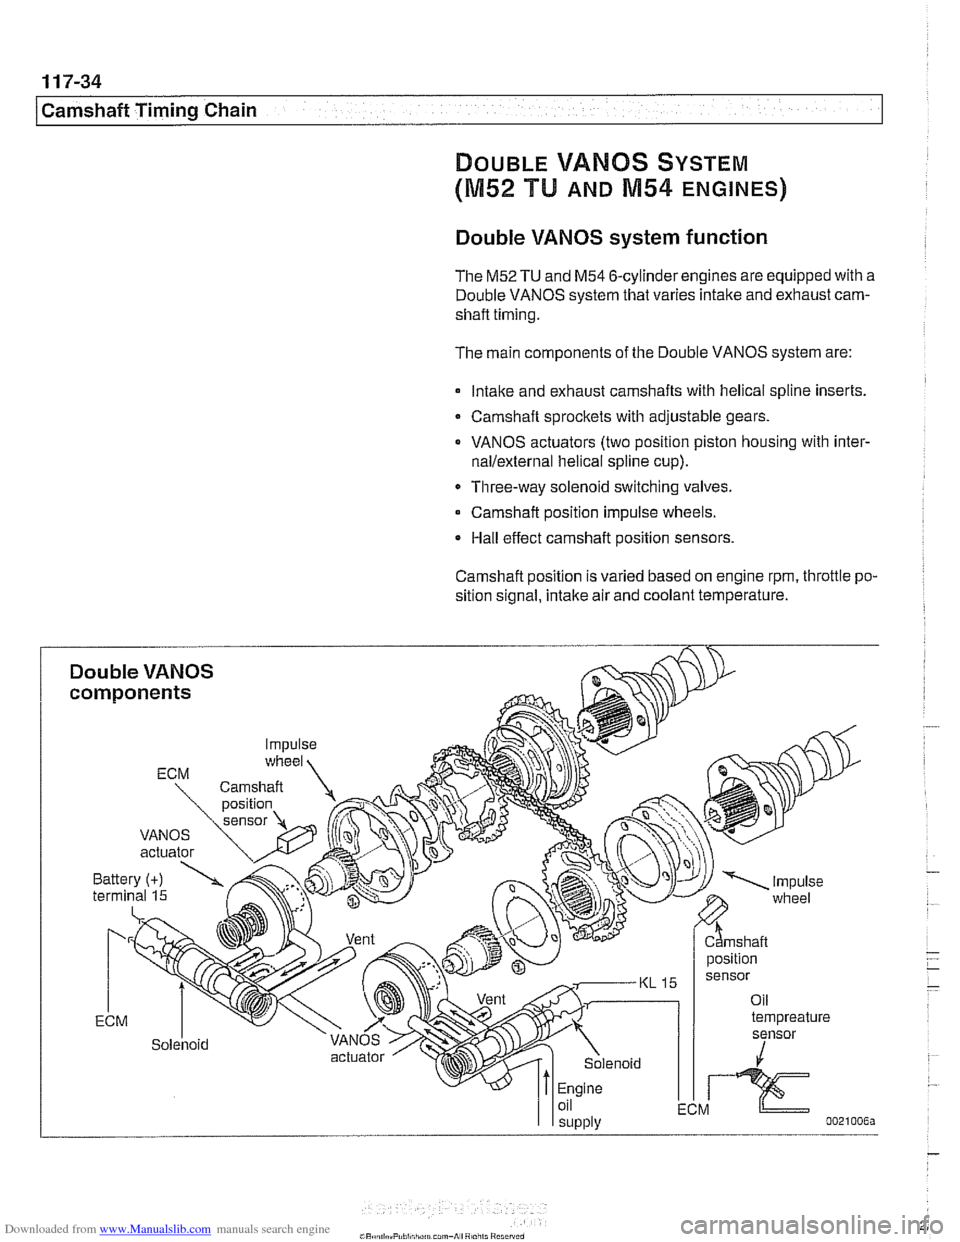 BMW 530i 1997 E39 Workshop Manual Downloaded from www.Manualslib.com manuals search engine 
1 17-34 
1 Camshaft Timing Chain 
DOUBLE VAMOS SYSTEM 
(M52 TU AND M54 ENGINES) 
Double VANOS system function 
The M52TU and M54 6-cylinder  e